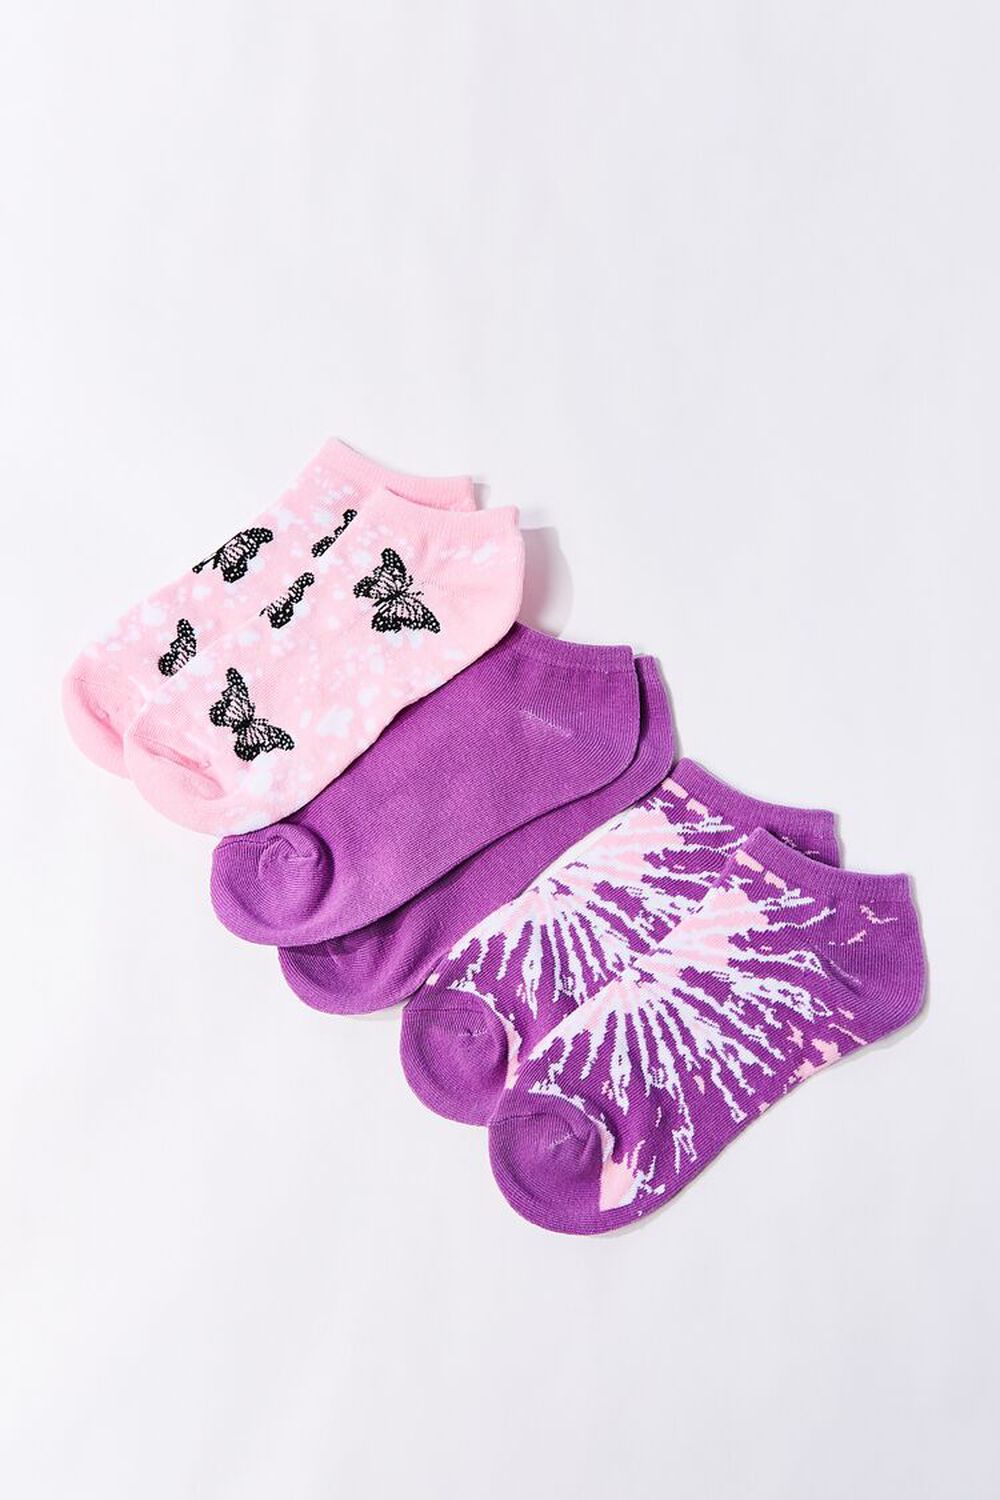 PINK/MULTI Butterfly Ankle Socks - 3 Pack, image 2